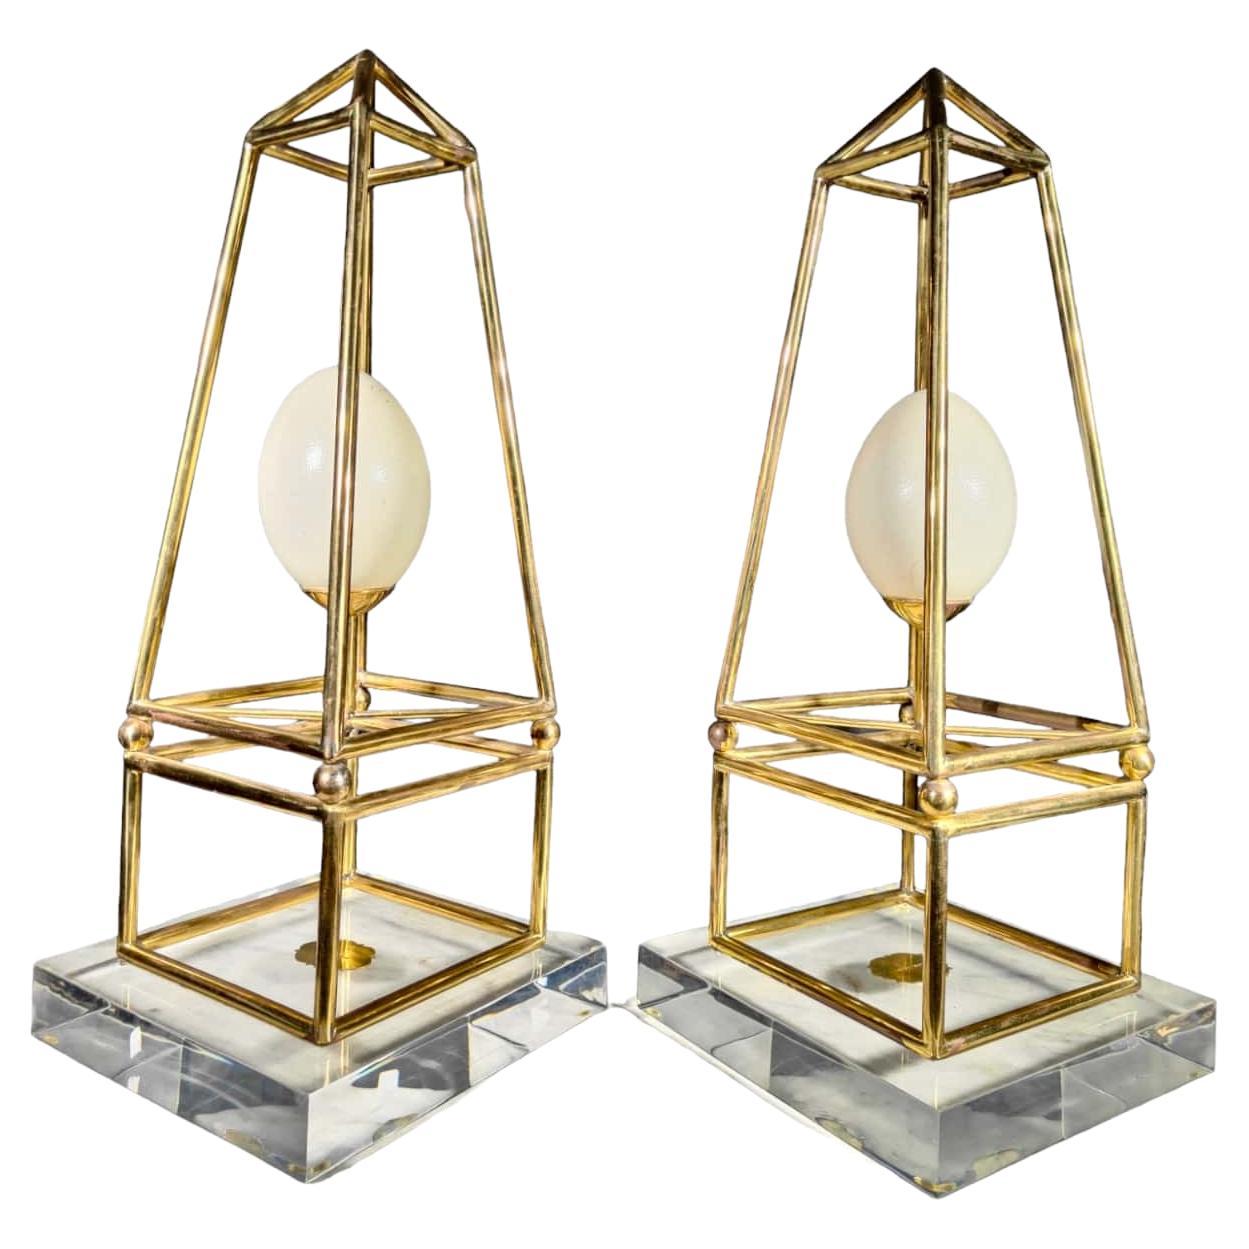 Anthony Redmile Bronze Obelisks - Elegant Pair with a Modern Luxe Touch